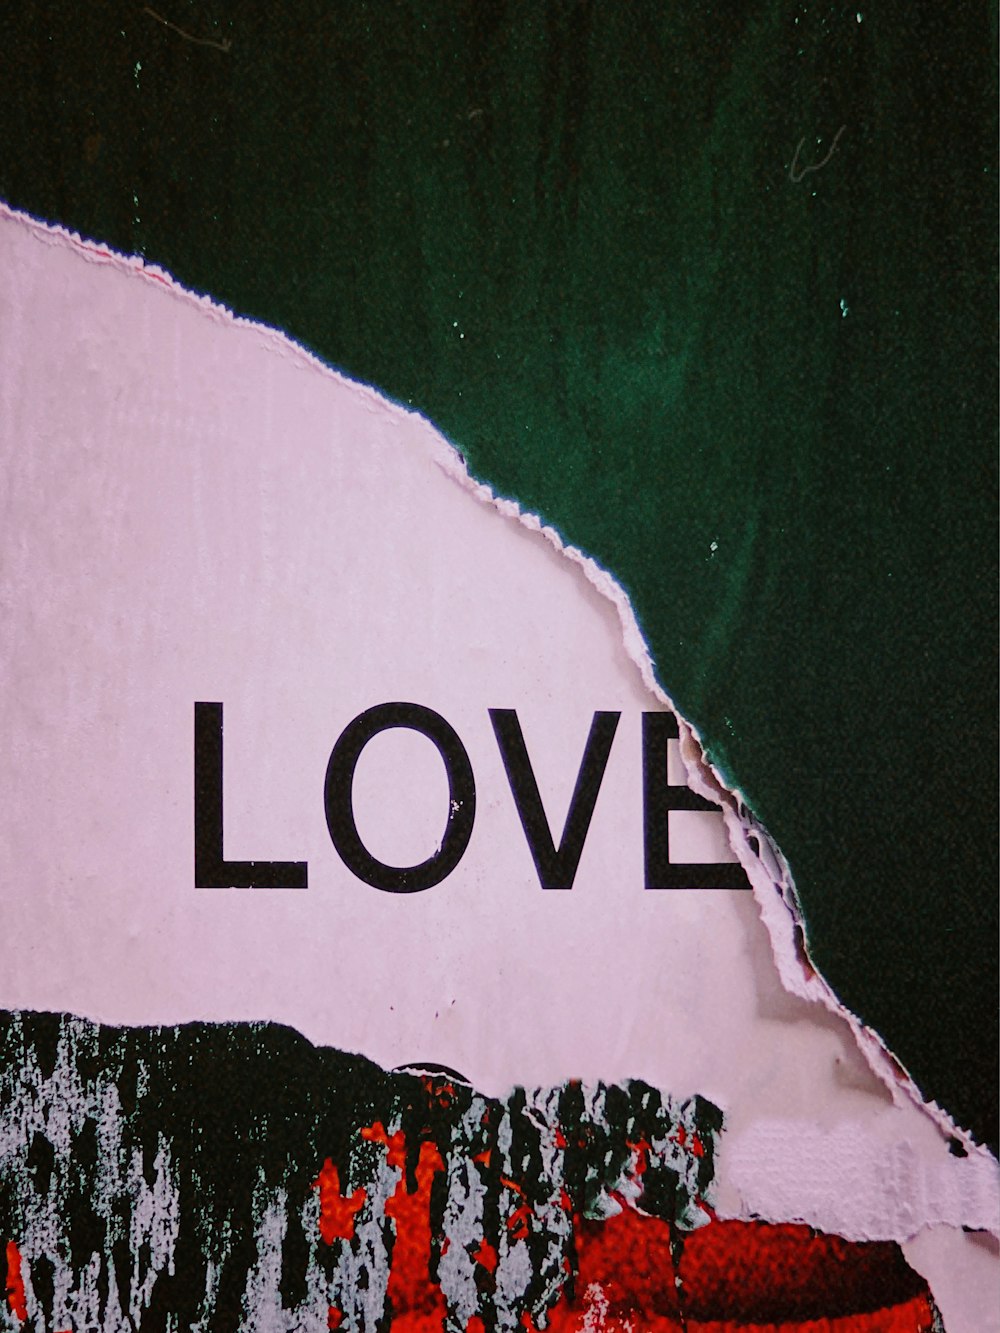 love text under green and red paper